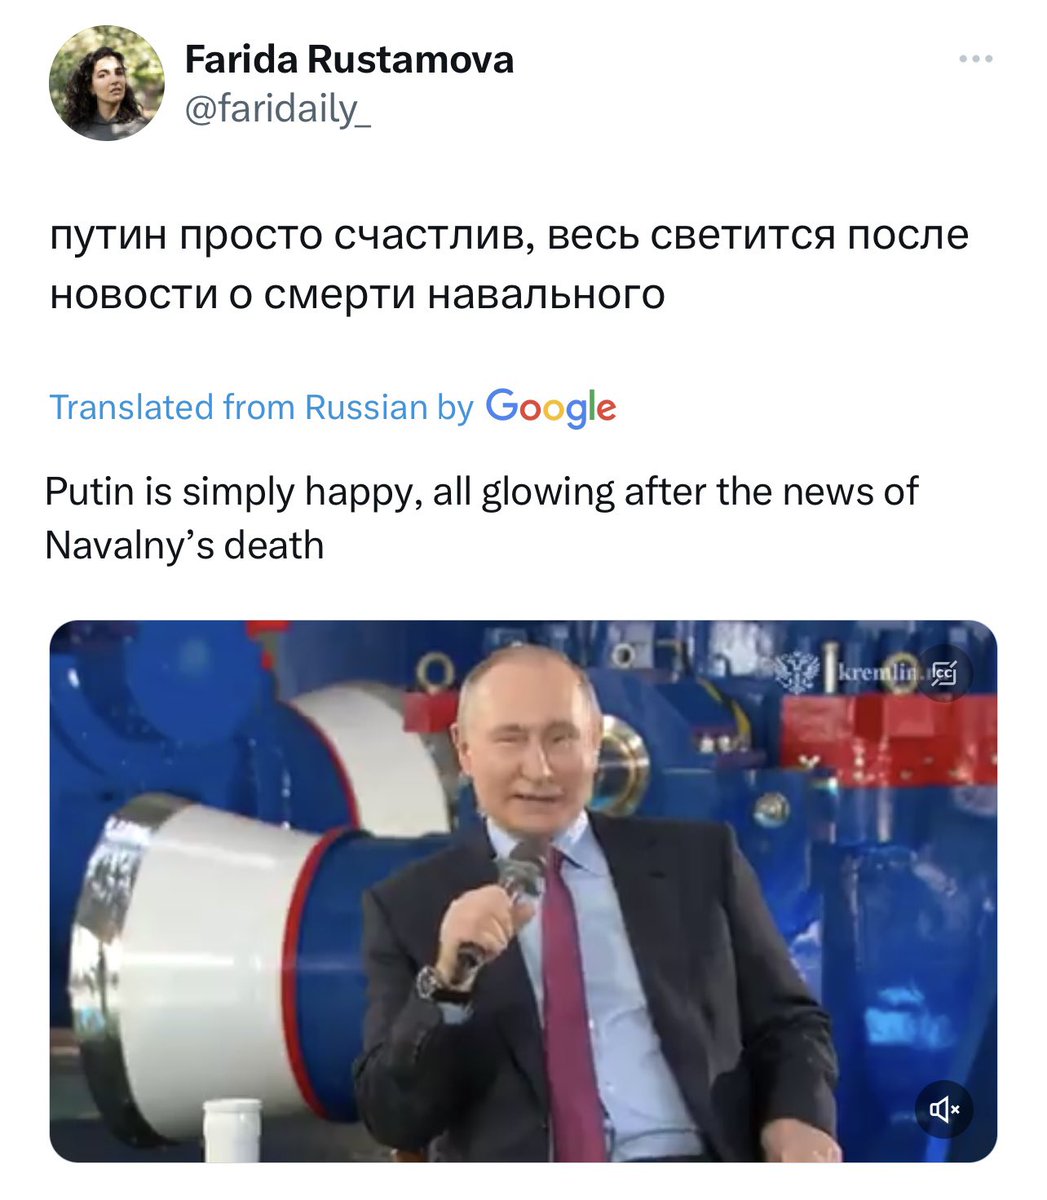 Putin is all aglow after the news of Navalny’s death. Gifts keep rolling in: from Tucker to MAGAs in Congress, and Trump saying he wouldn’t mind Russia having its way with NATO countries.